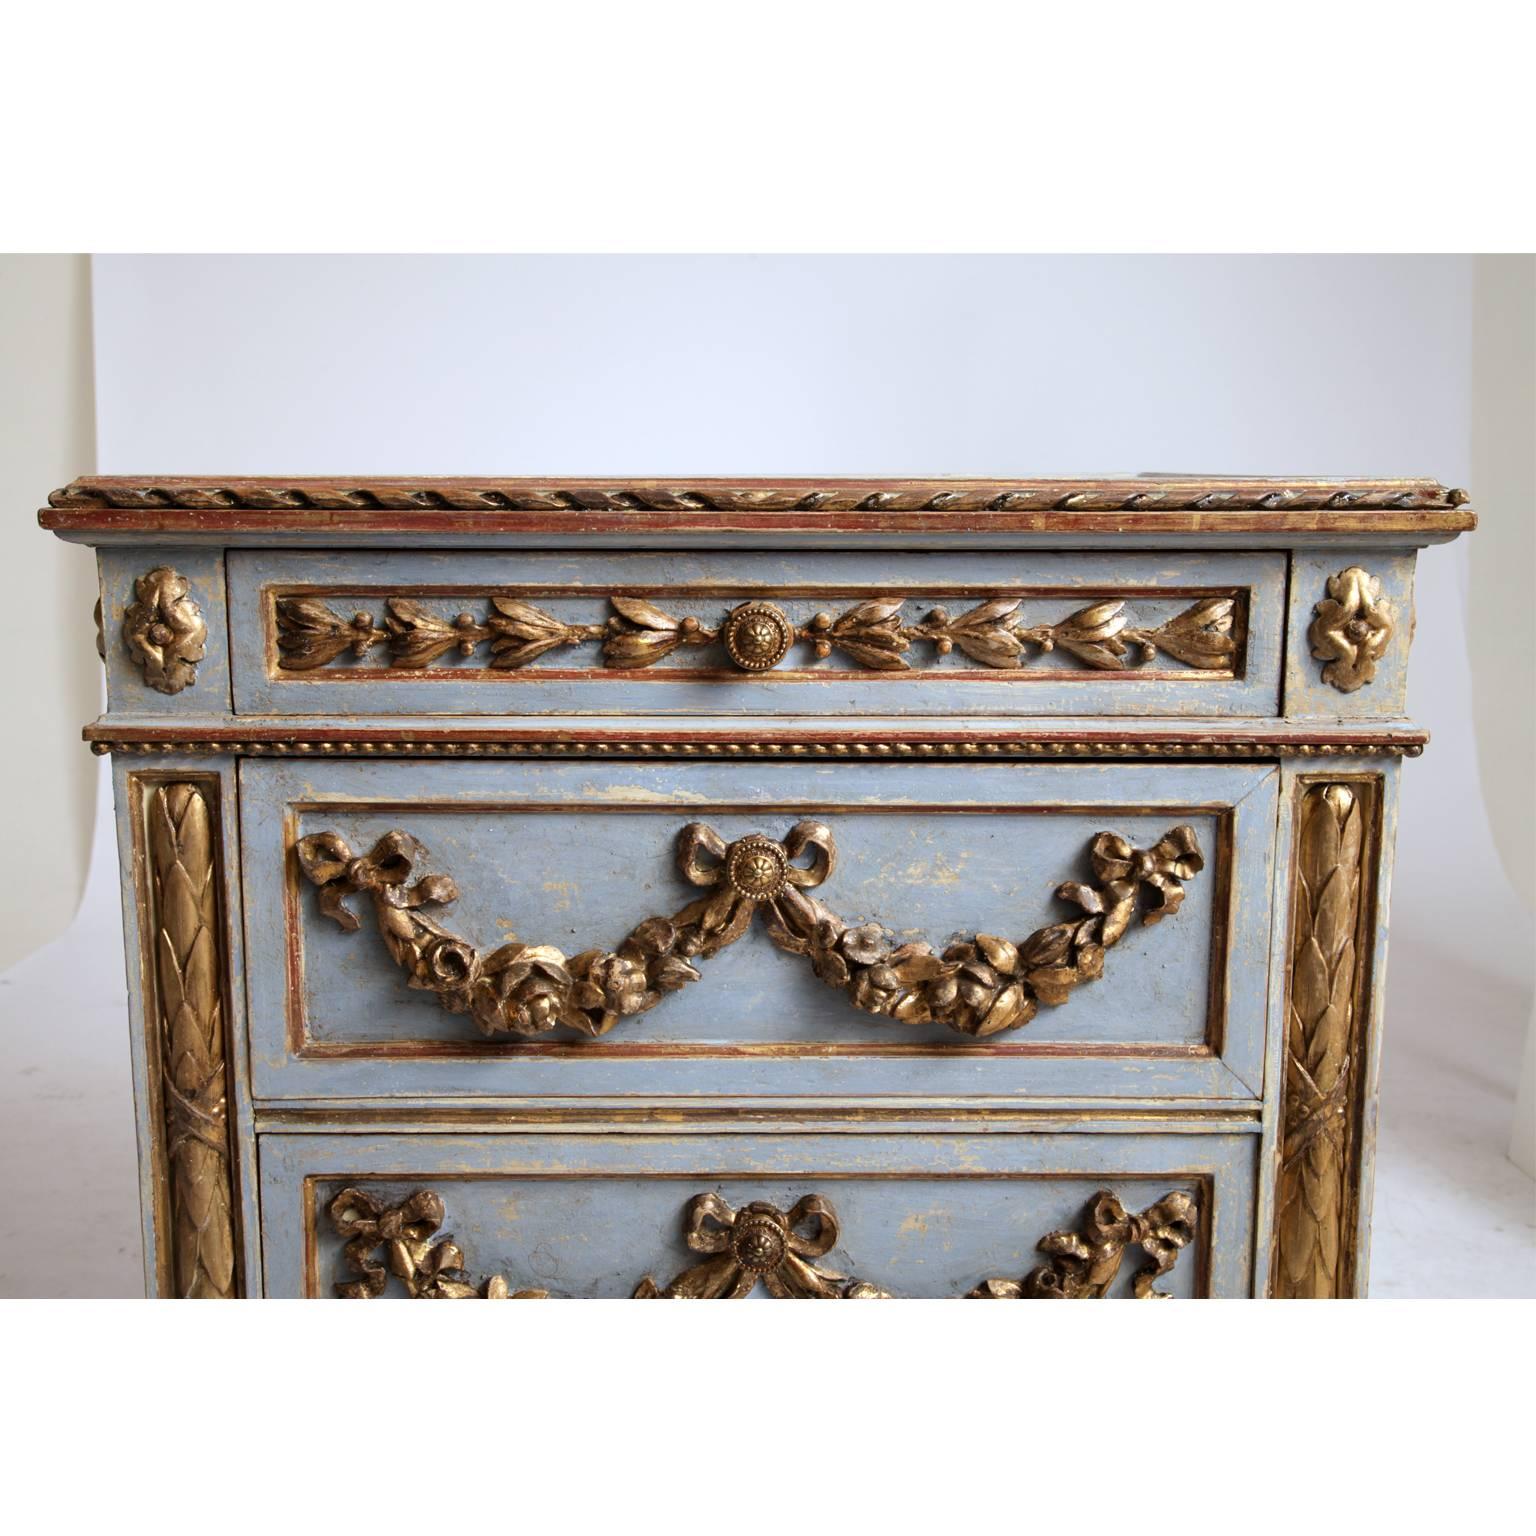 Three-drawered chest in Louis Seize style. Blue corpus with gilded carved festons on skirt, drawers and sides. The paint was professionally redone and has a slightly worn look to it.